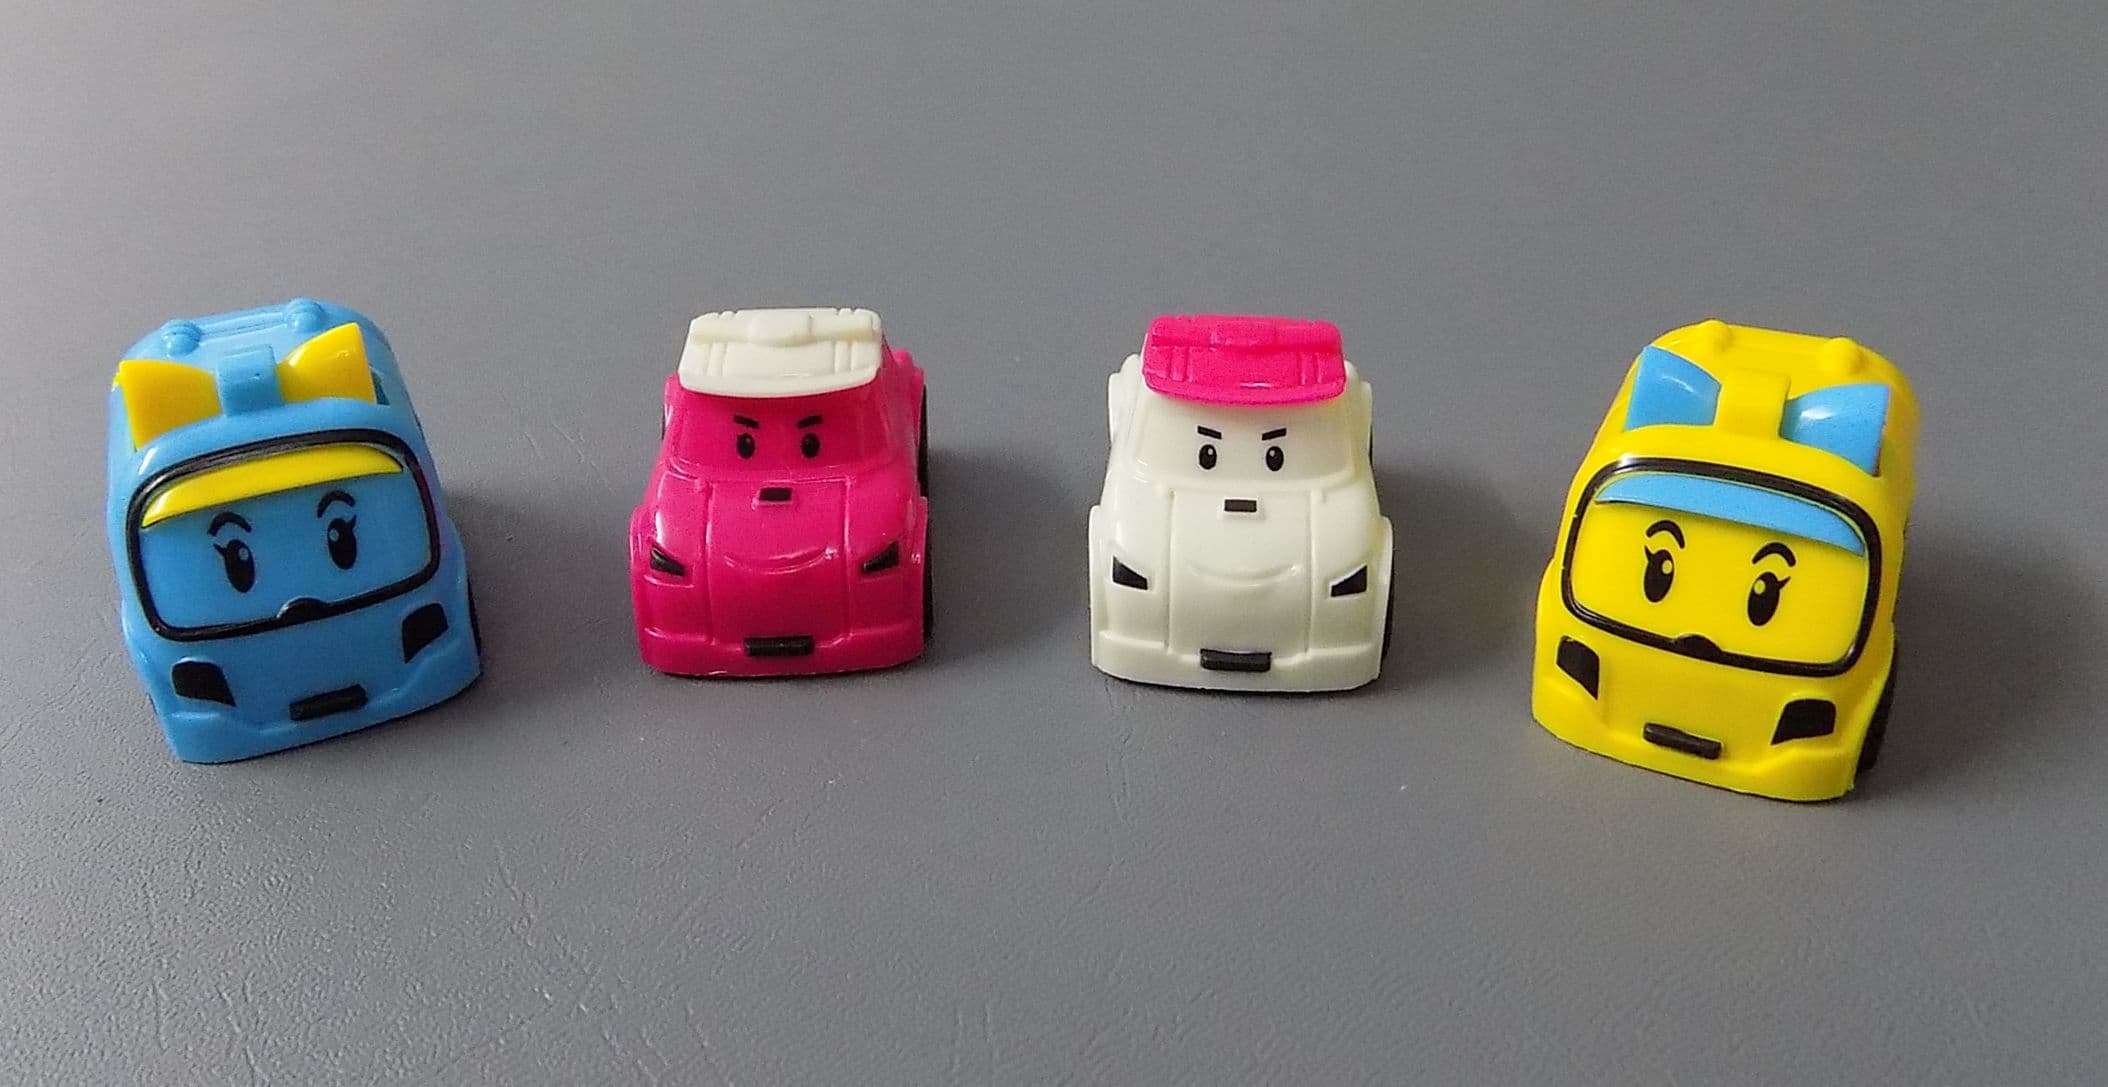 High Quality Cute 4 Dinky Toy Cars of 2 Inches Each Pull Back Toy Vehicle- Best Toy For Kids- What You See Is What You Will Get